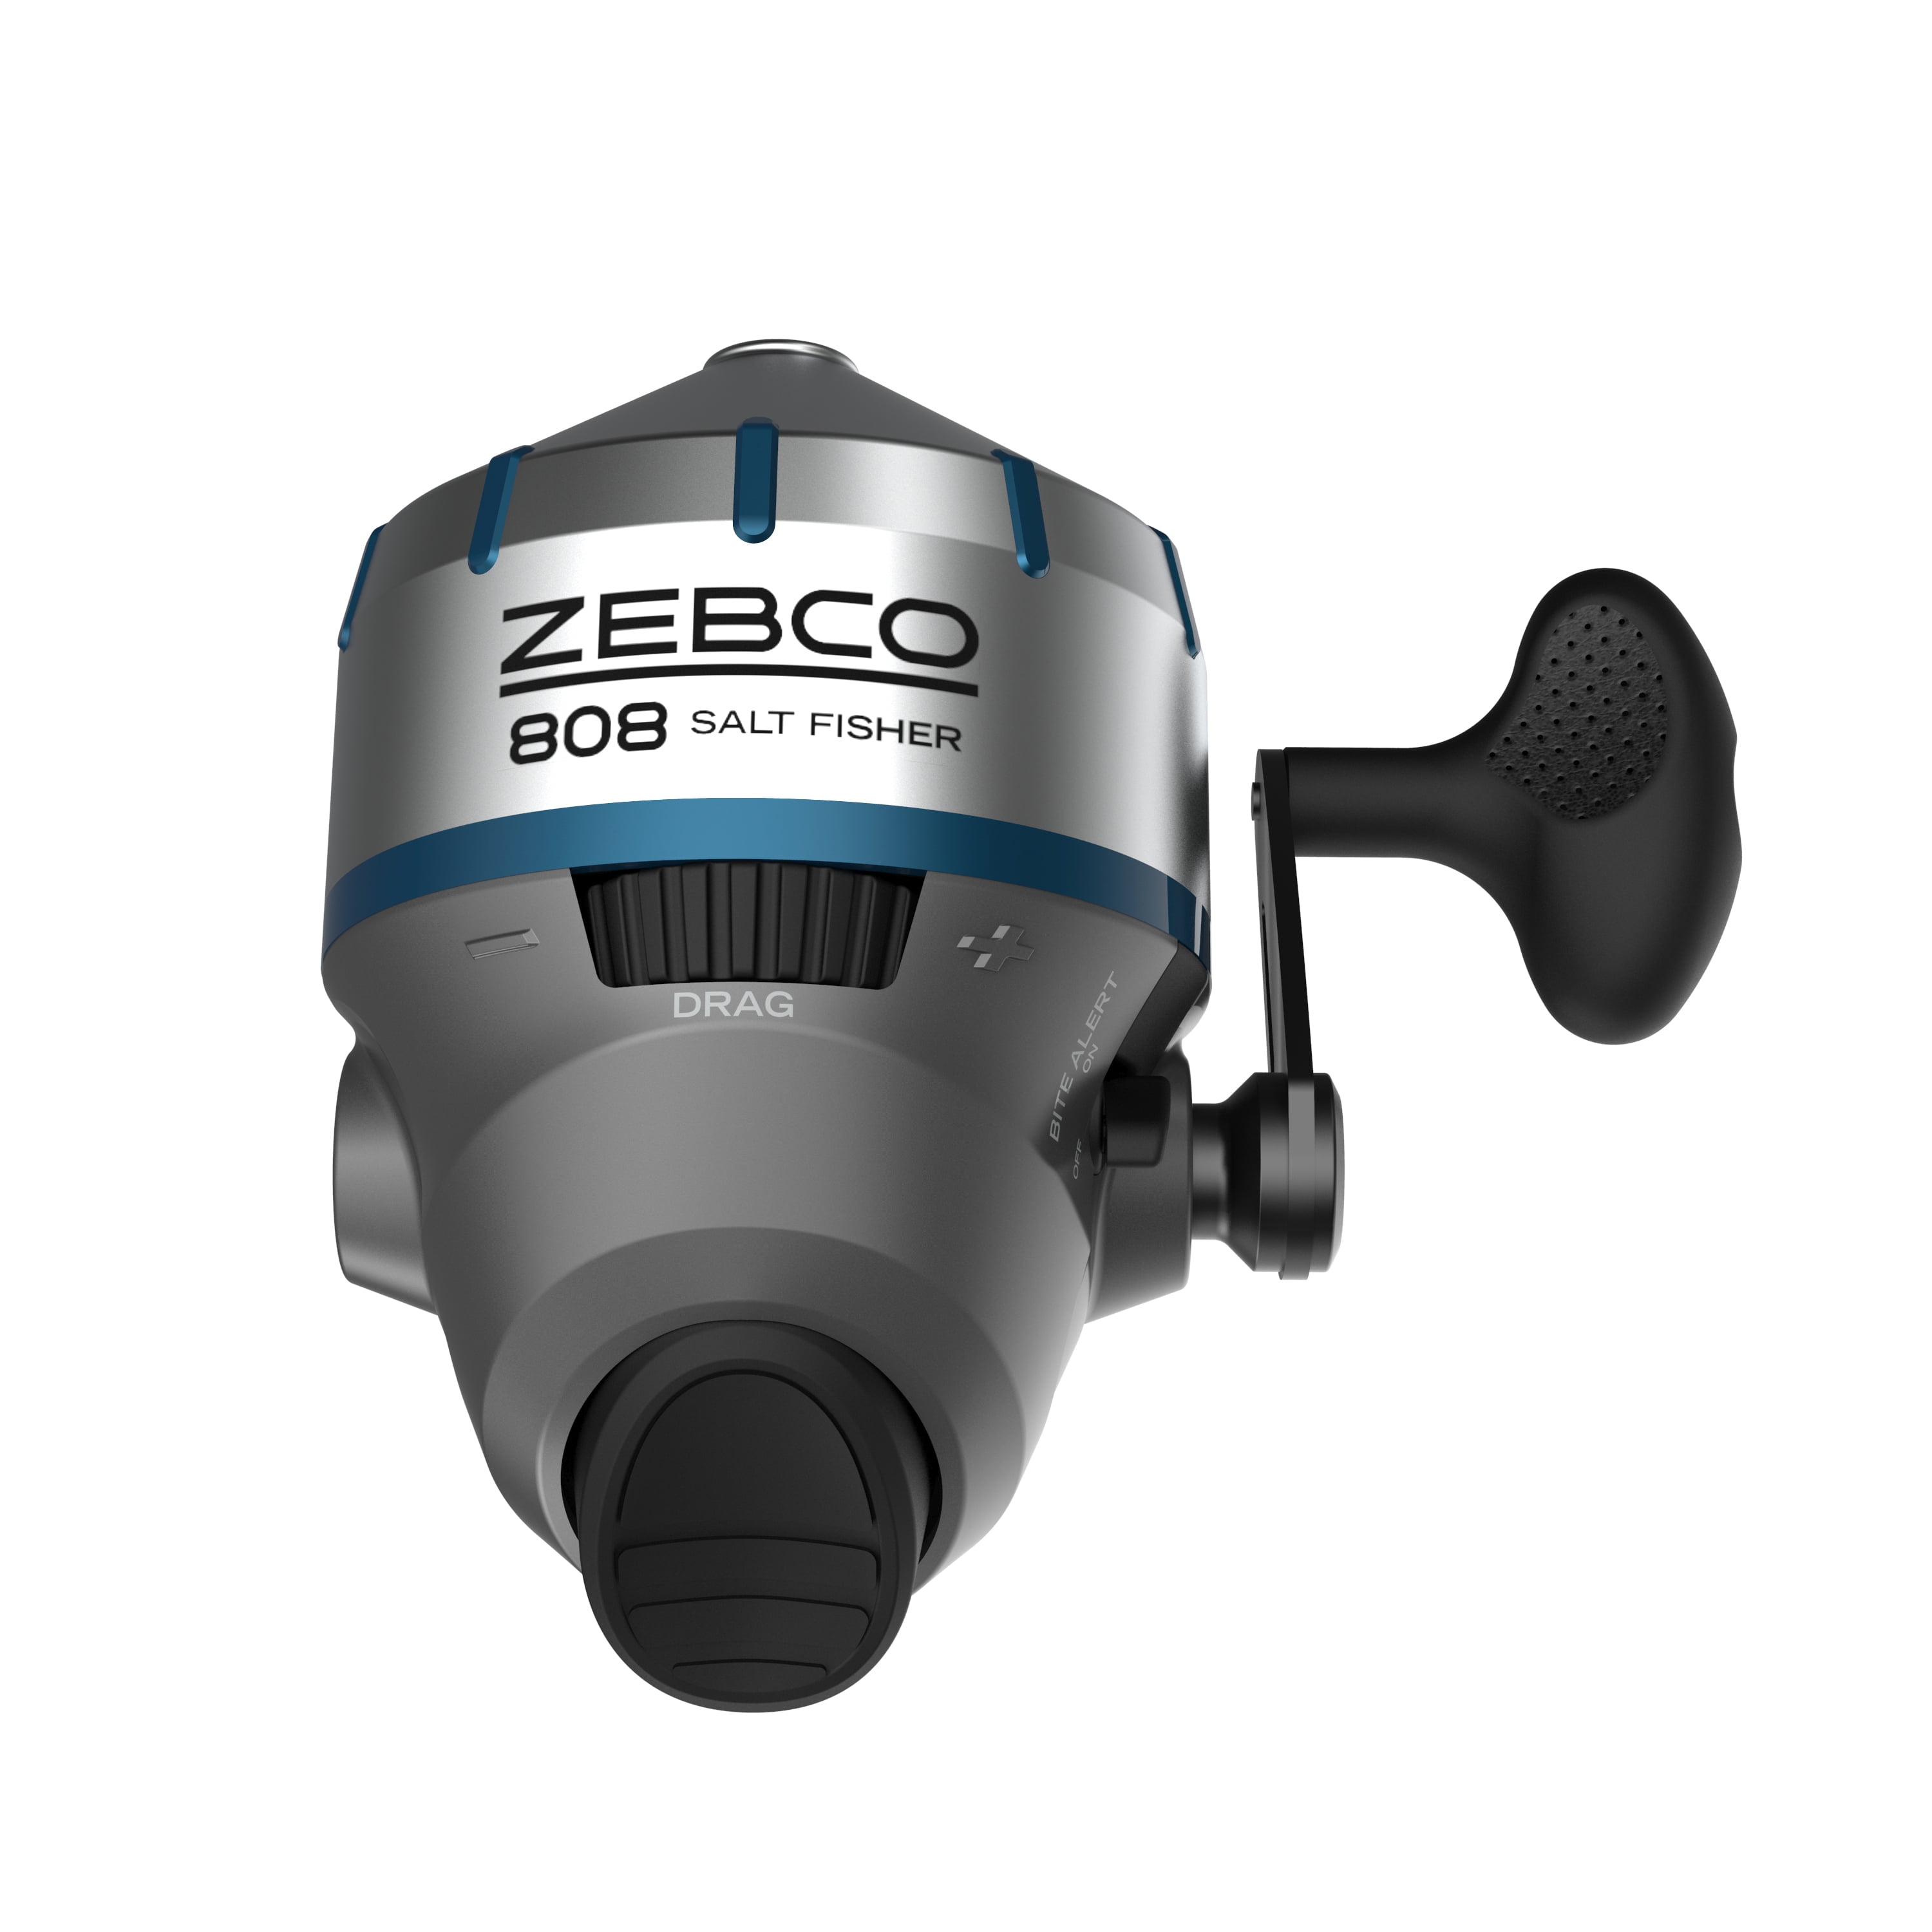  Zebco 33 Max Spincast Fishing Reel, Size 60 Reel, Built-in  Bite Alert, Lightweight Graphite Frame, 2:6:1 Gear Ratio, Pre-spooled with  20-Pound Zebco Cajun Fishing Line, Silver/Black (2016) : Sports & Outdoors